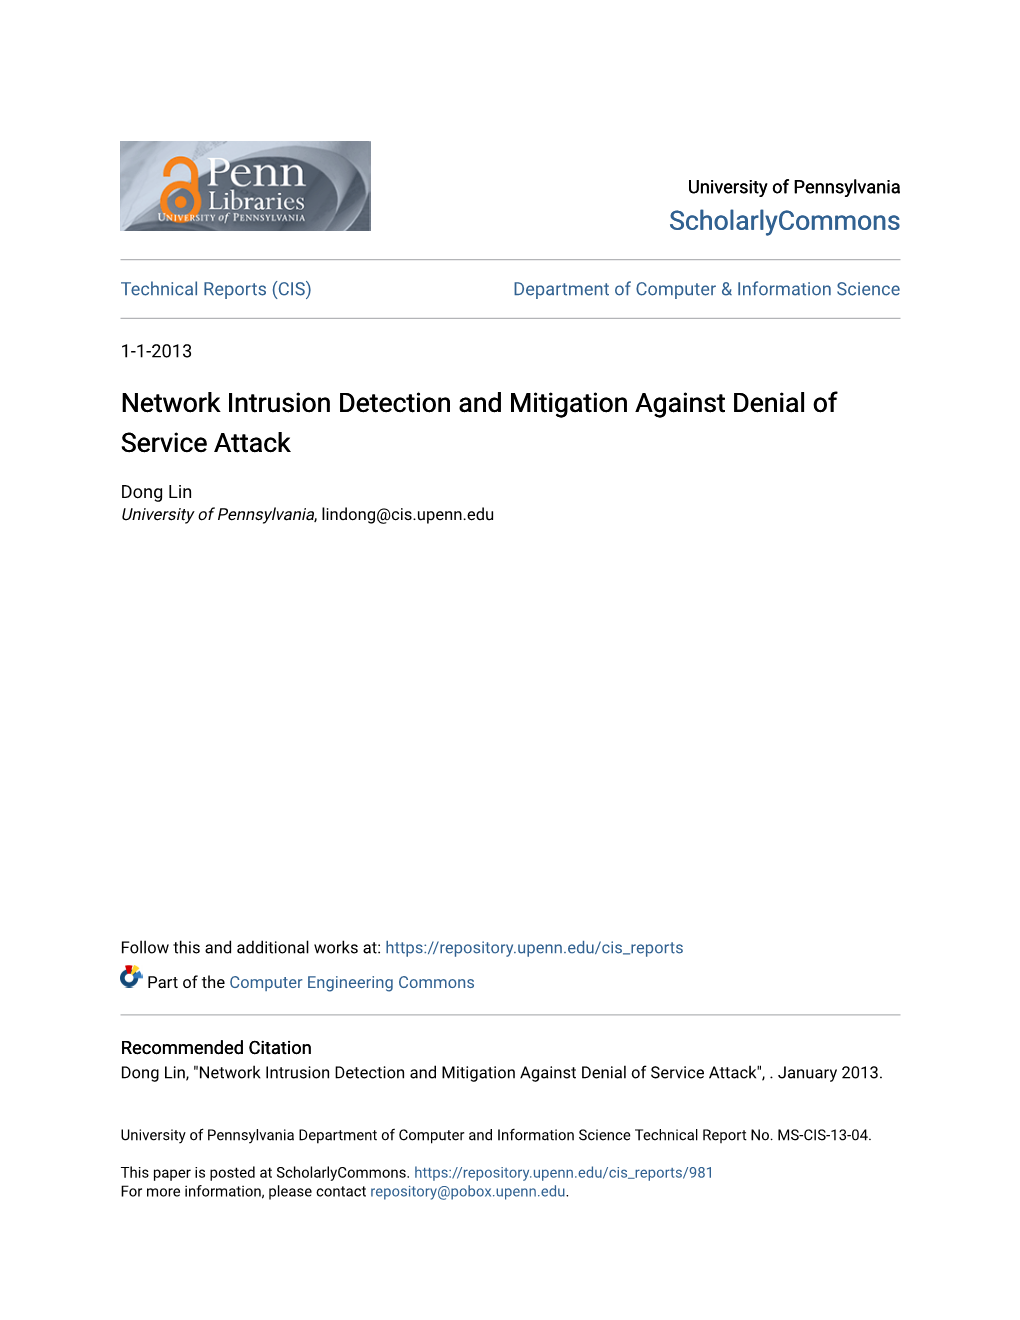 Network Intrusion Detection and Mitigation Against Denial of Service Attack